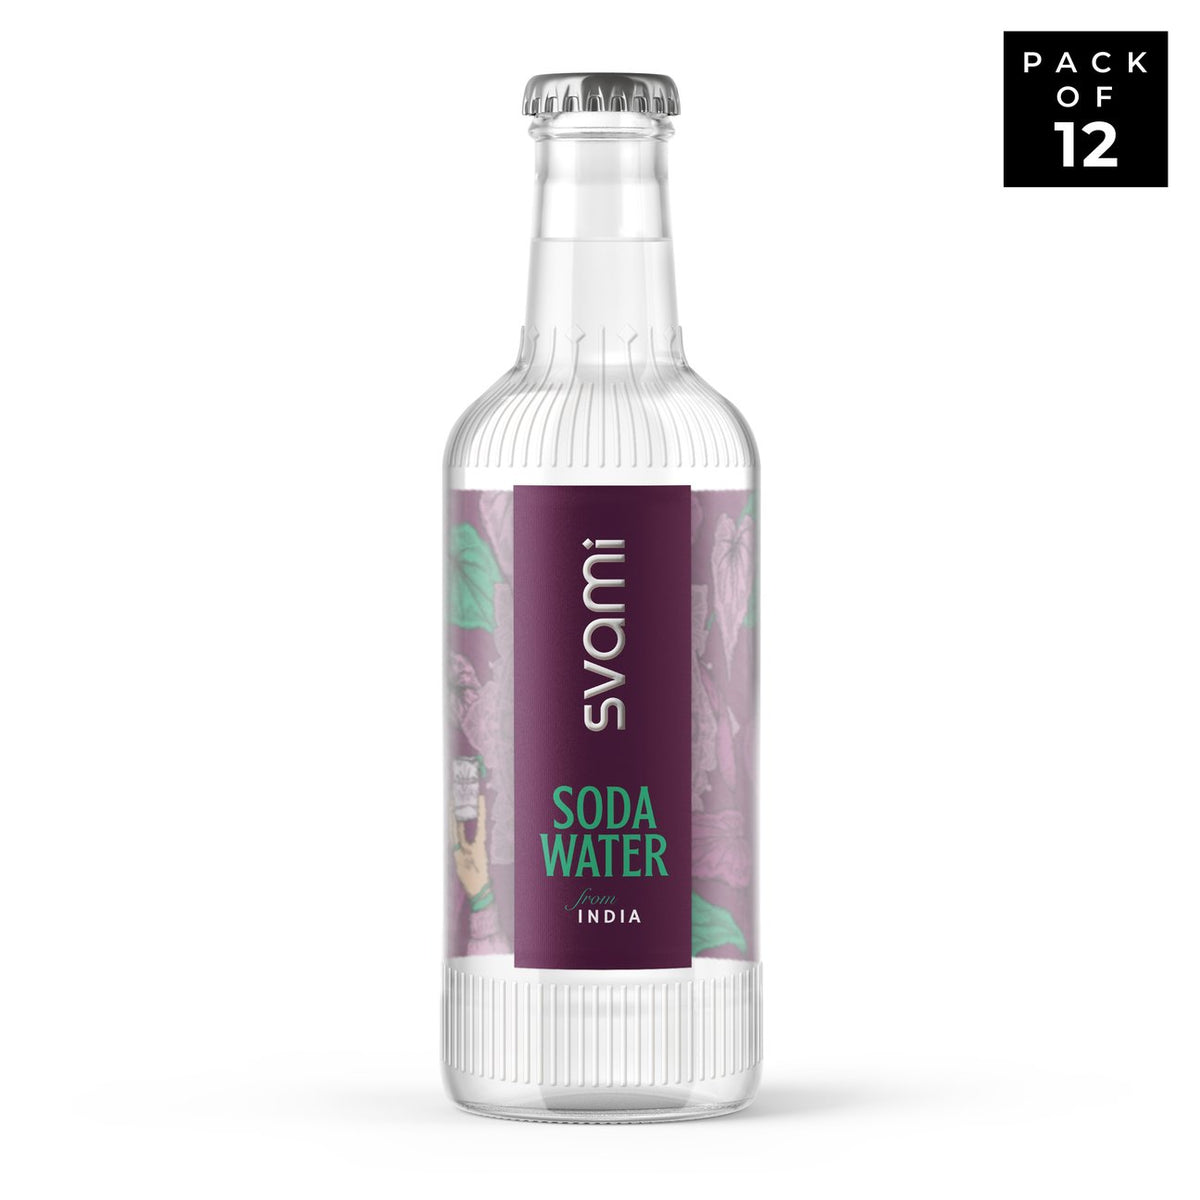 CRED Svami Experience Kit - Pack of Soda Water